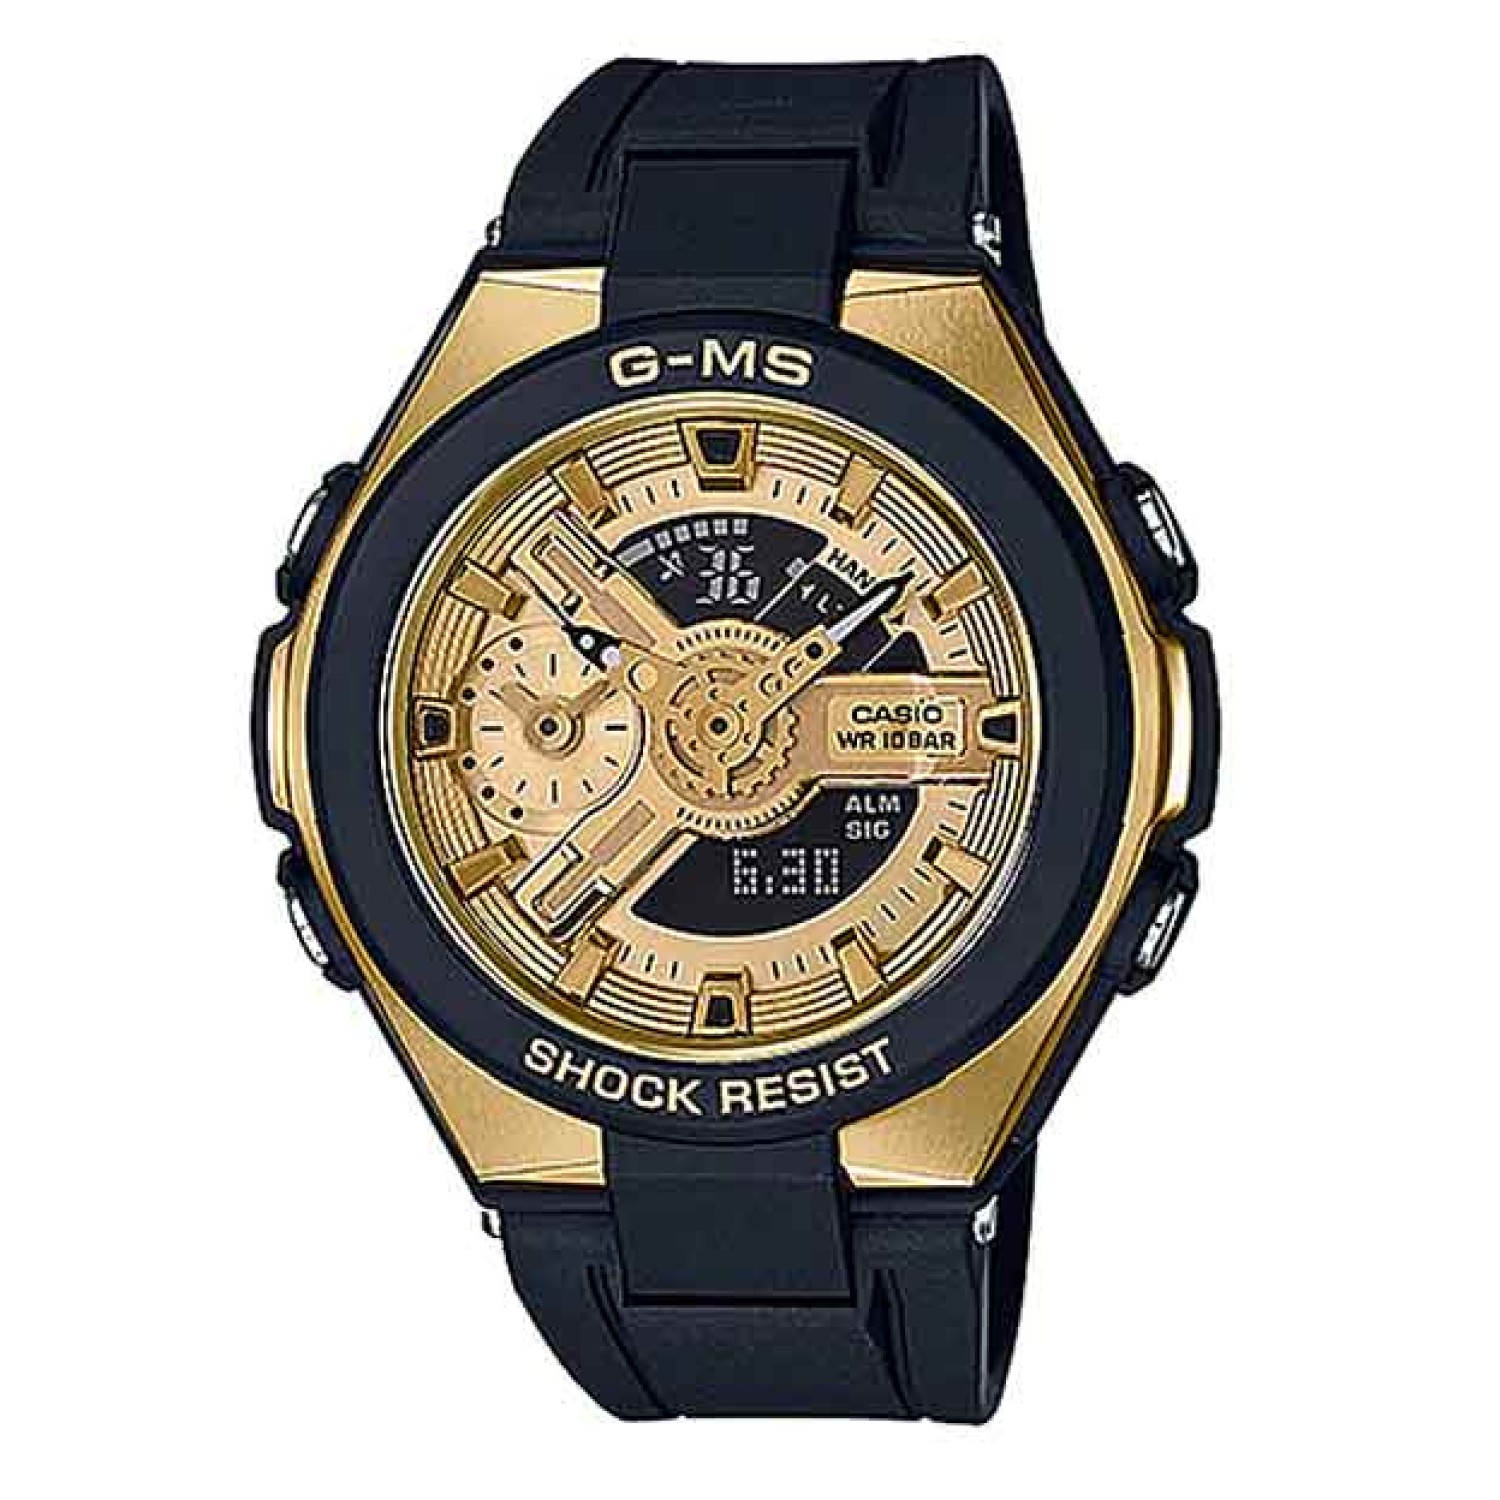 MSG400G-1A2 Casio BabY-G  G-MS Series Gold Watch.   From the BABY-G G-MS lineup of watches for the active and sophisticated woman of today comes a selection of brilliant design models. The generous use of gold and pink gold colour metal parts creates a co